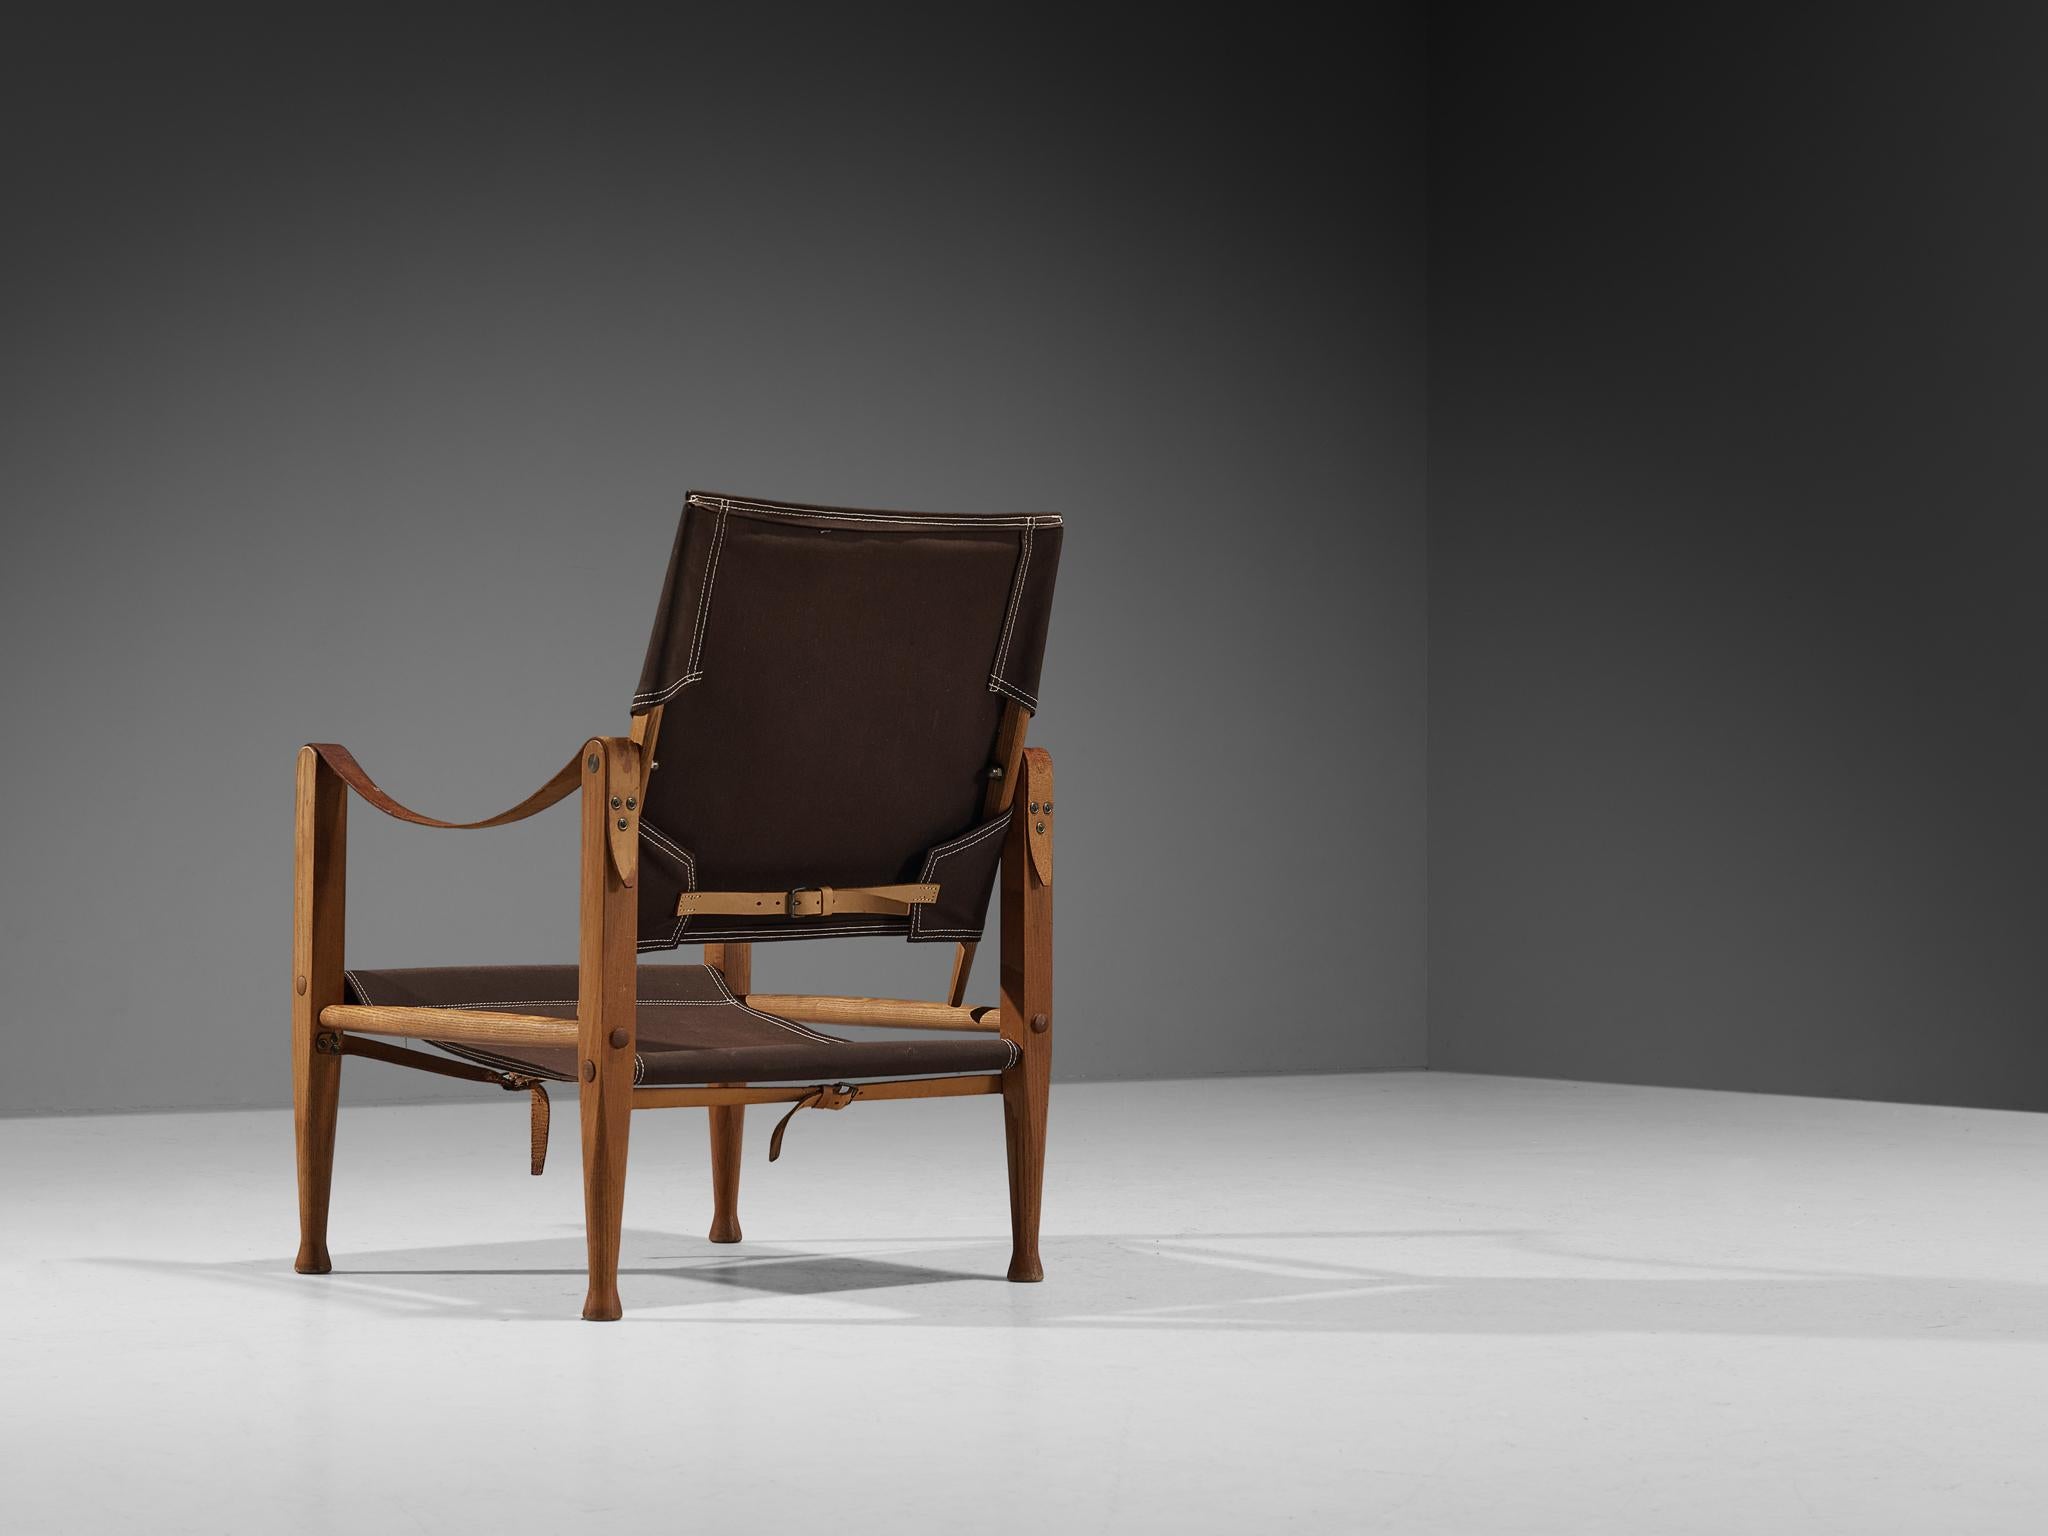 Kaare Klint for Rud Rasmussen, safari chair model 'KK47000', ash, canvas, metal, brass, leather, Denmark, designed in 1933 and produced in 1960s. 

The chair shows very elegant and well-designed lines, in combination with carefully crafted wood